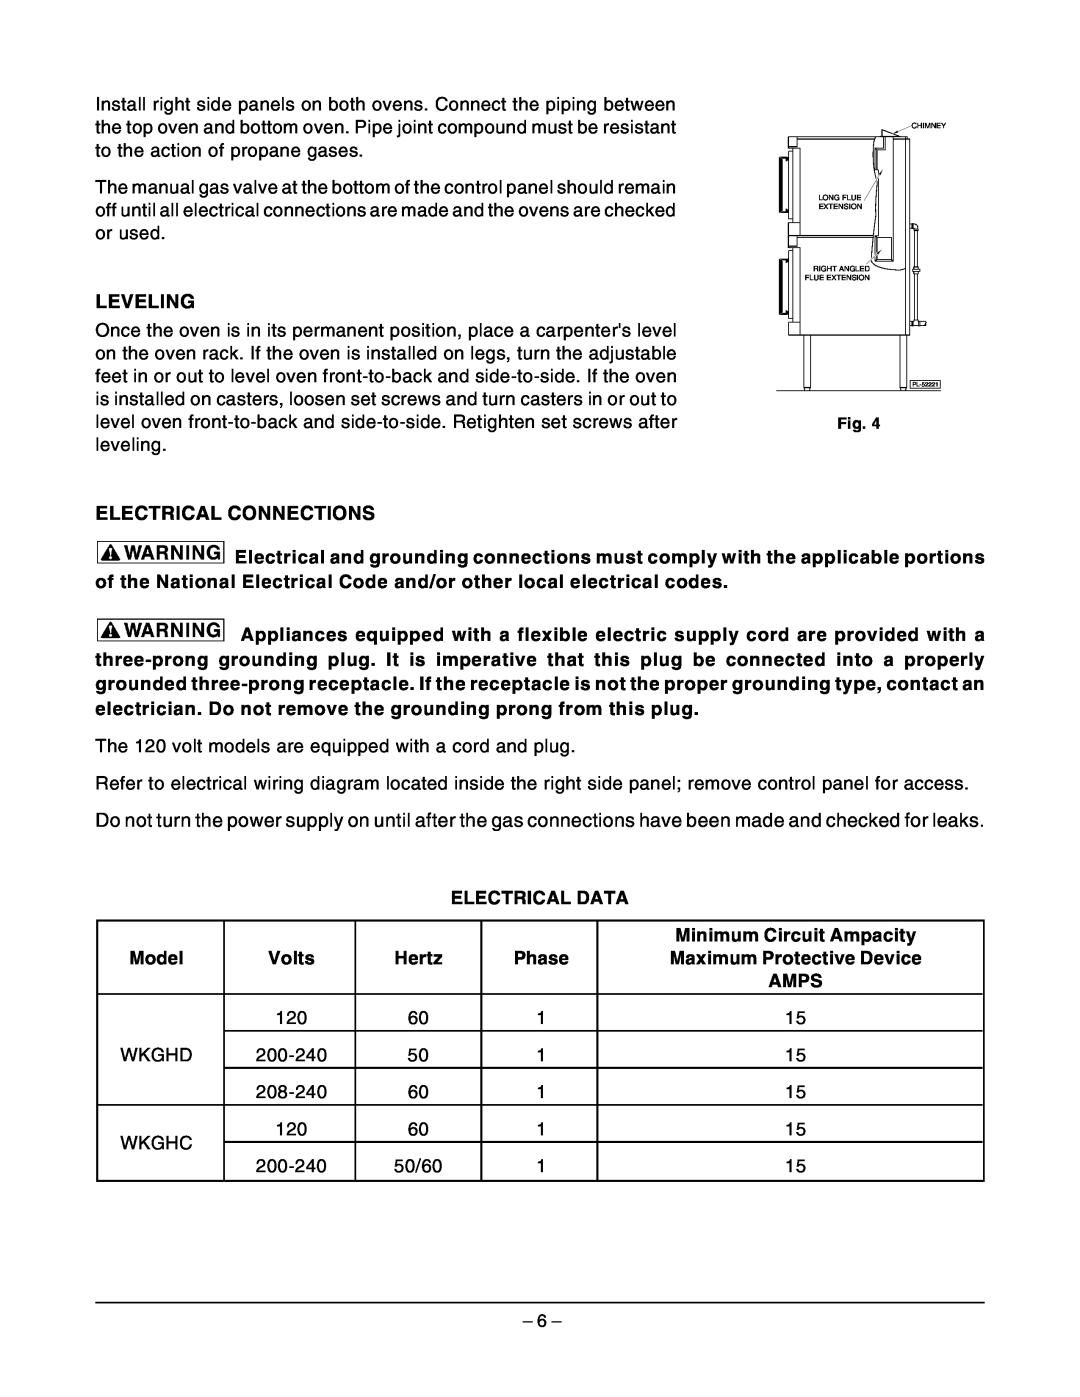 Wolf Appliance Company WKGHC ML-767590, WKGHD ML-767589 owner manual Leveling, Electrical Connections 